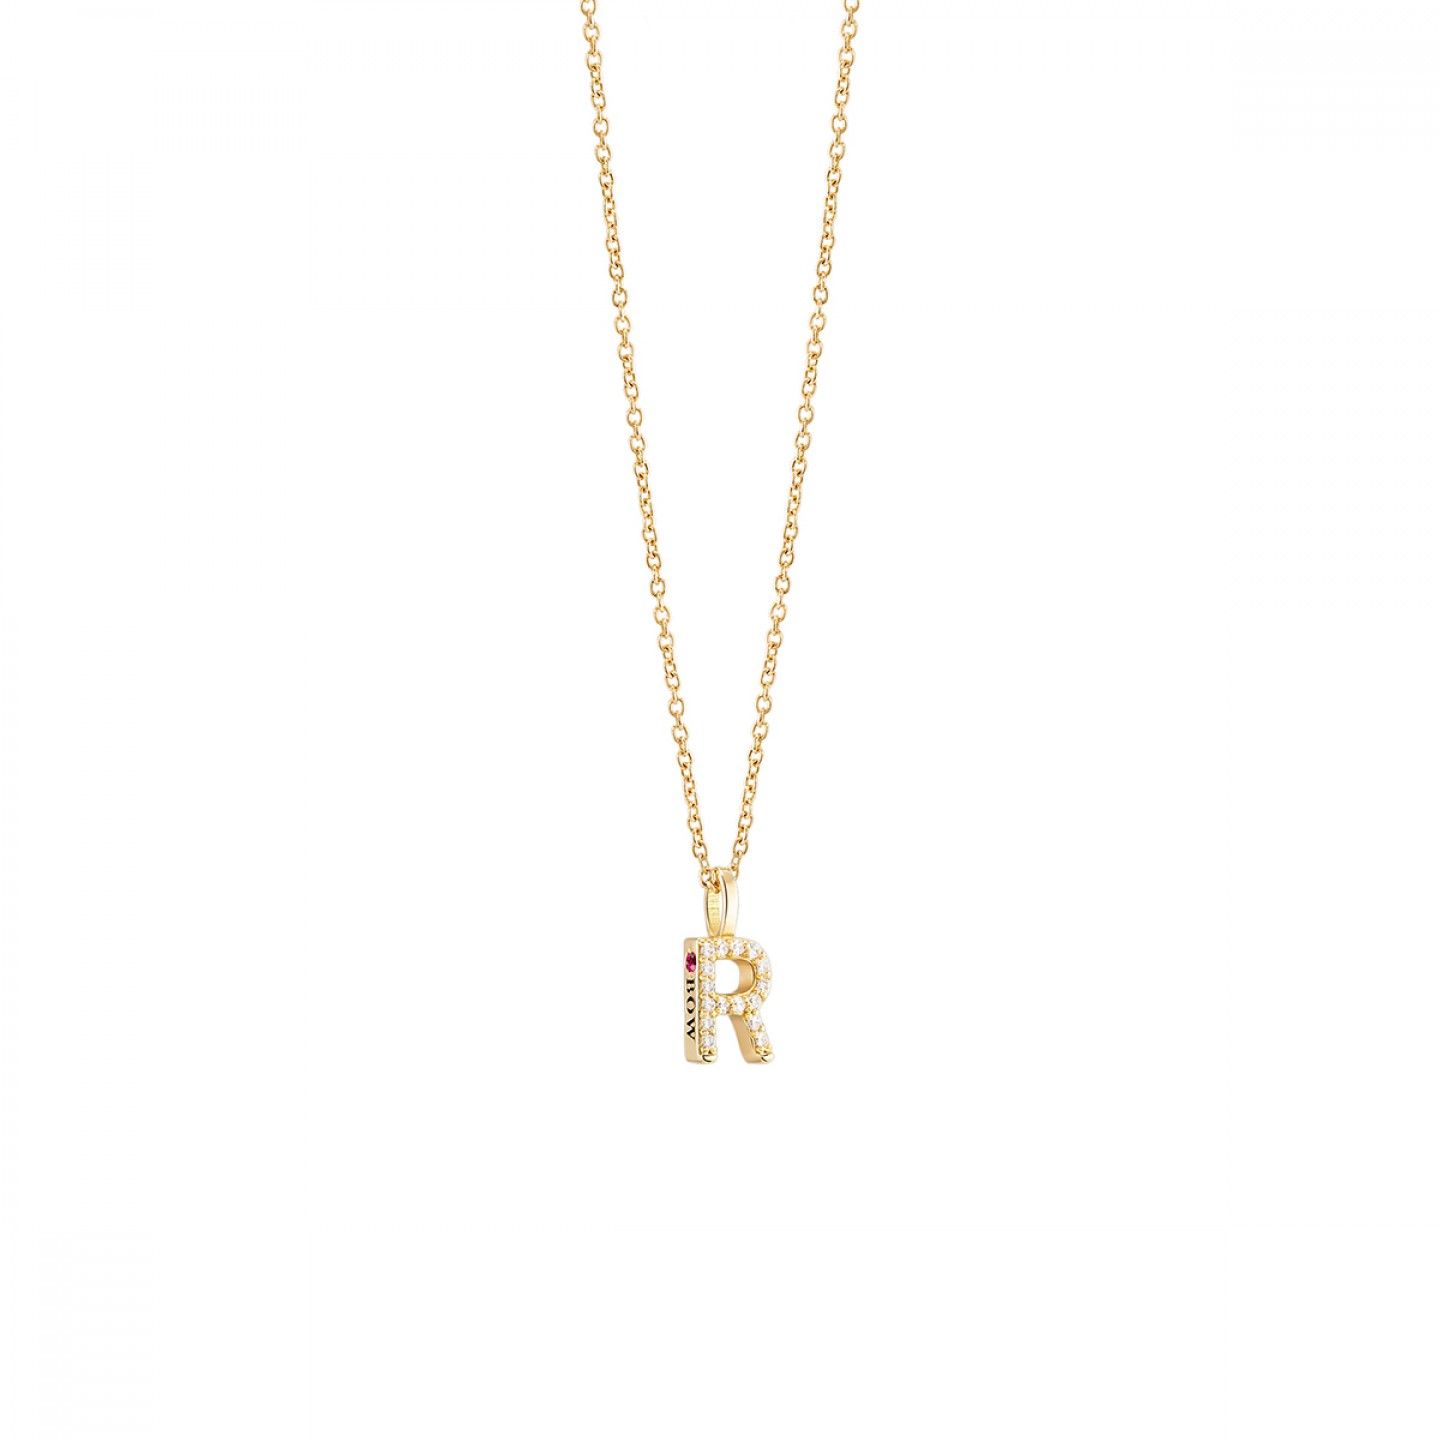 PENDENTE BOW GOLD - LETTER R